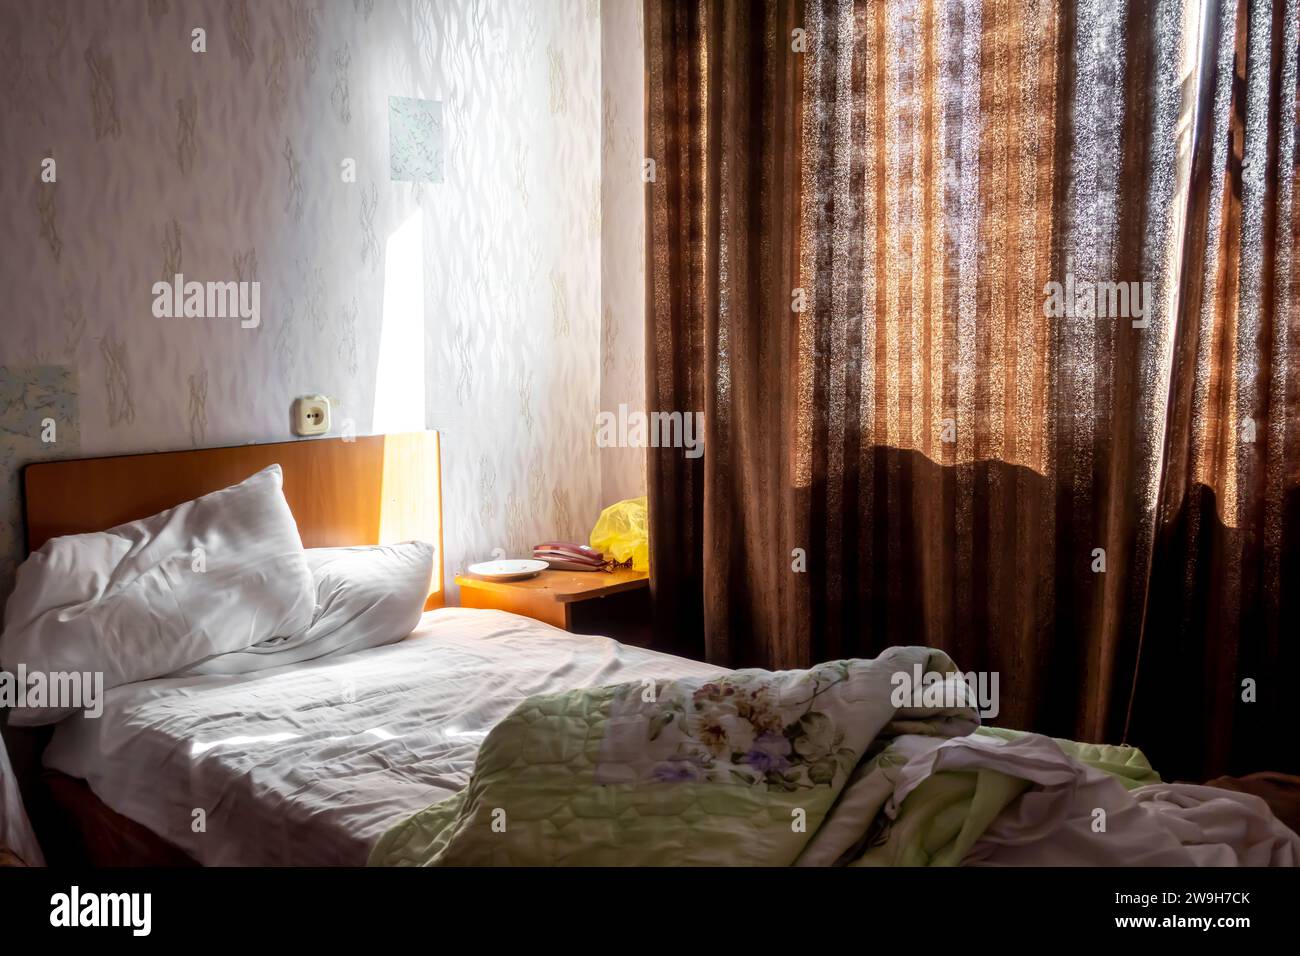 Standard room with unmade bed in Aktobe hotel - a 3-star cheap lodging in Aqtobe Kazakhstan Stock Photo